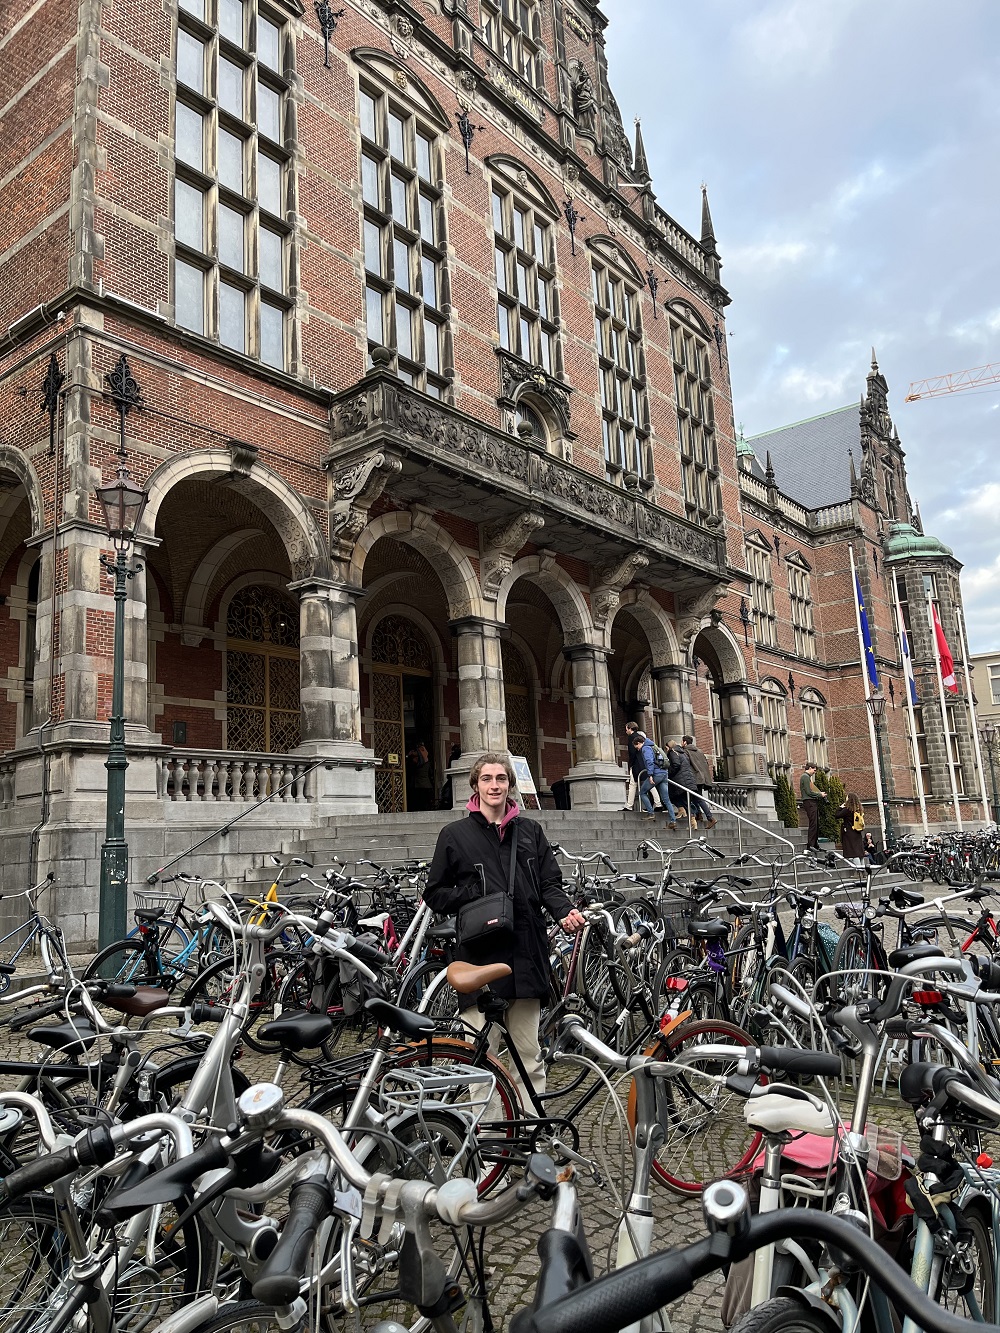 student Corey stood next to loads of bikes parked outside University building in Netherlands